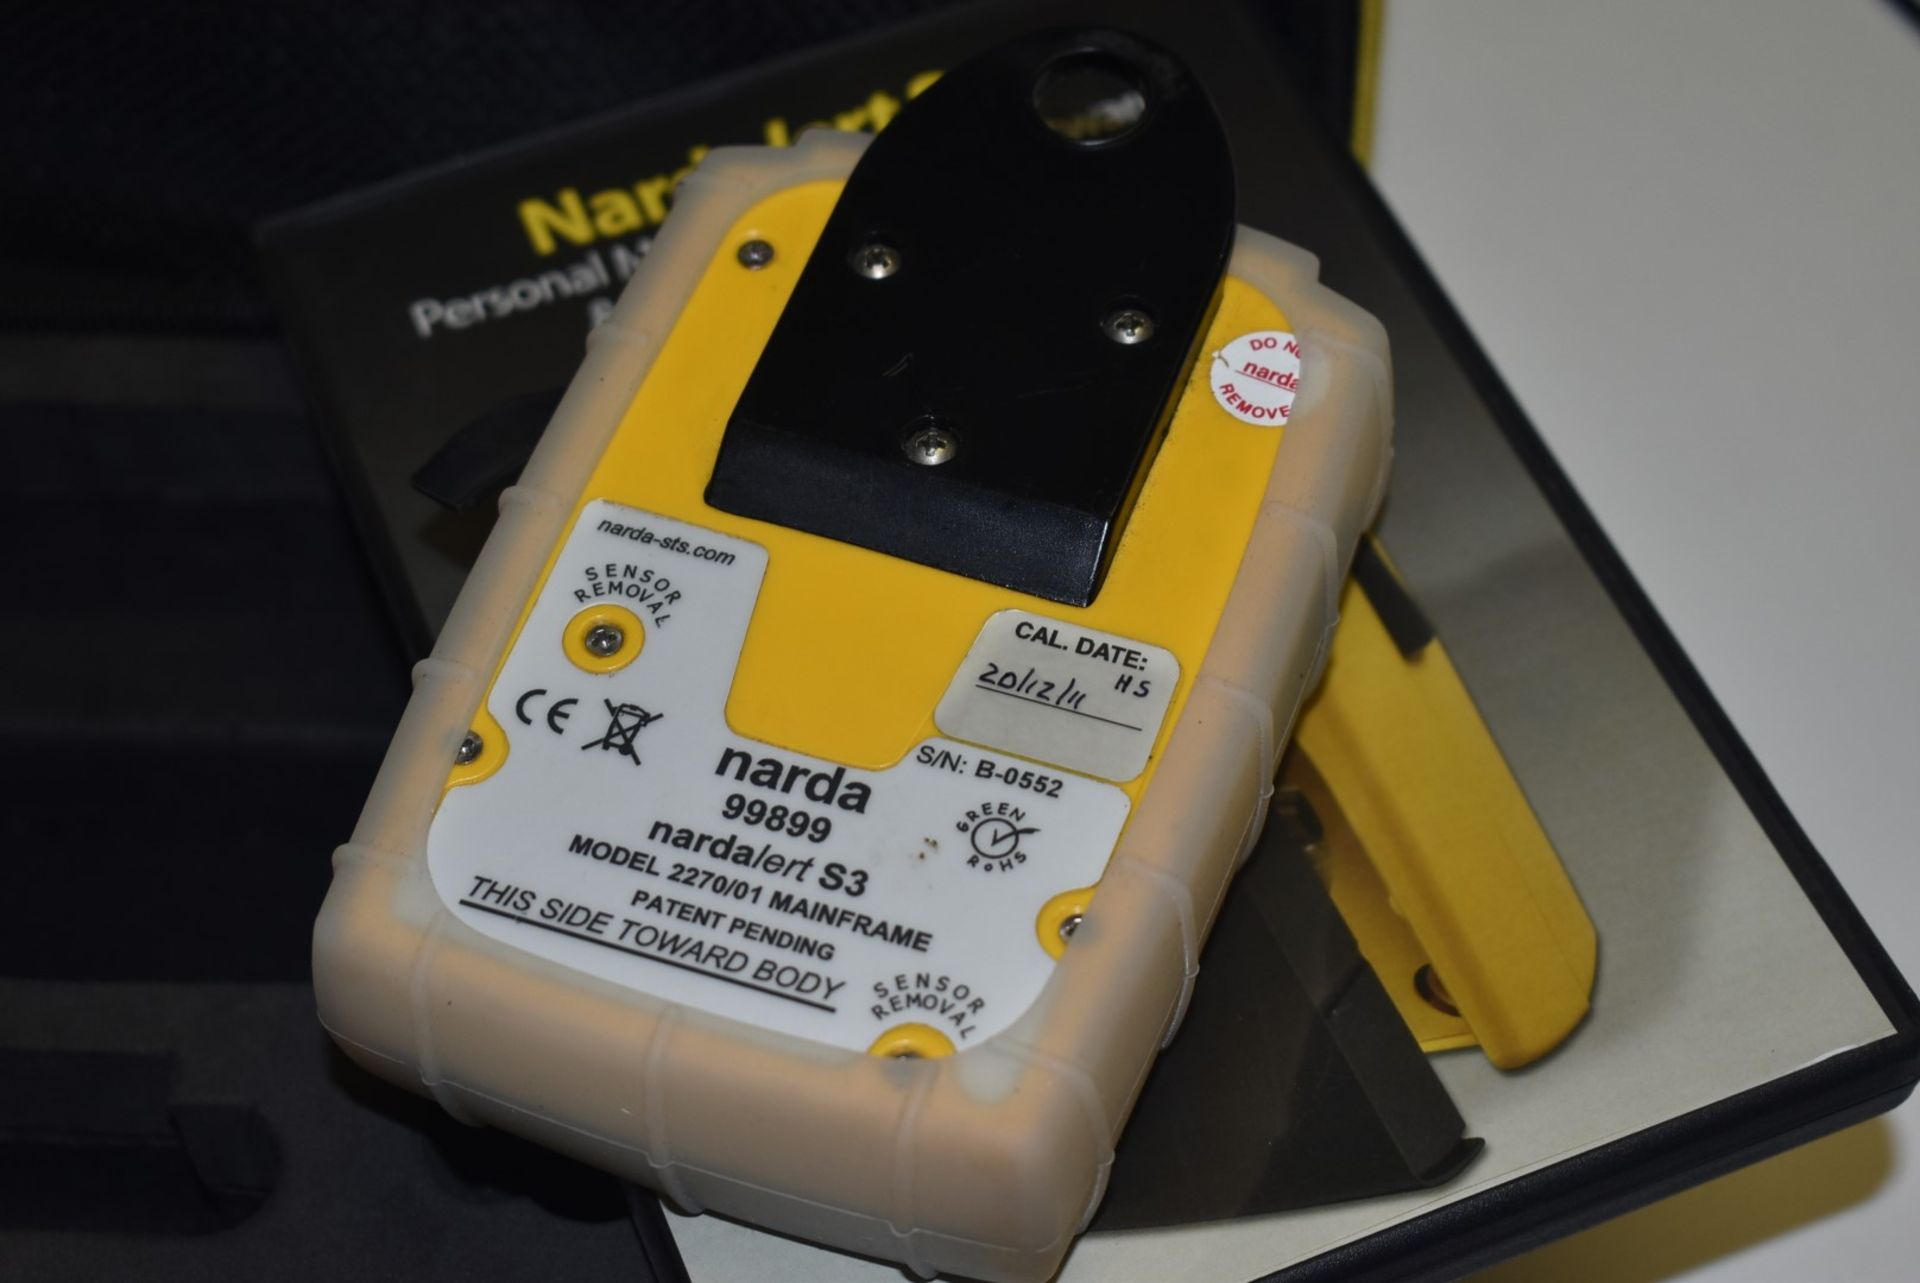 1 x Nardalert S3 None Ionizing Radiation Monitor - Model 2270/01 Mainframe - Includes Protection - Image 6 of 6